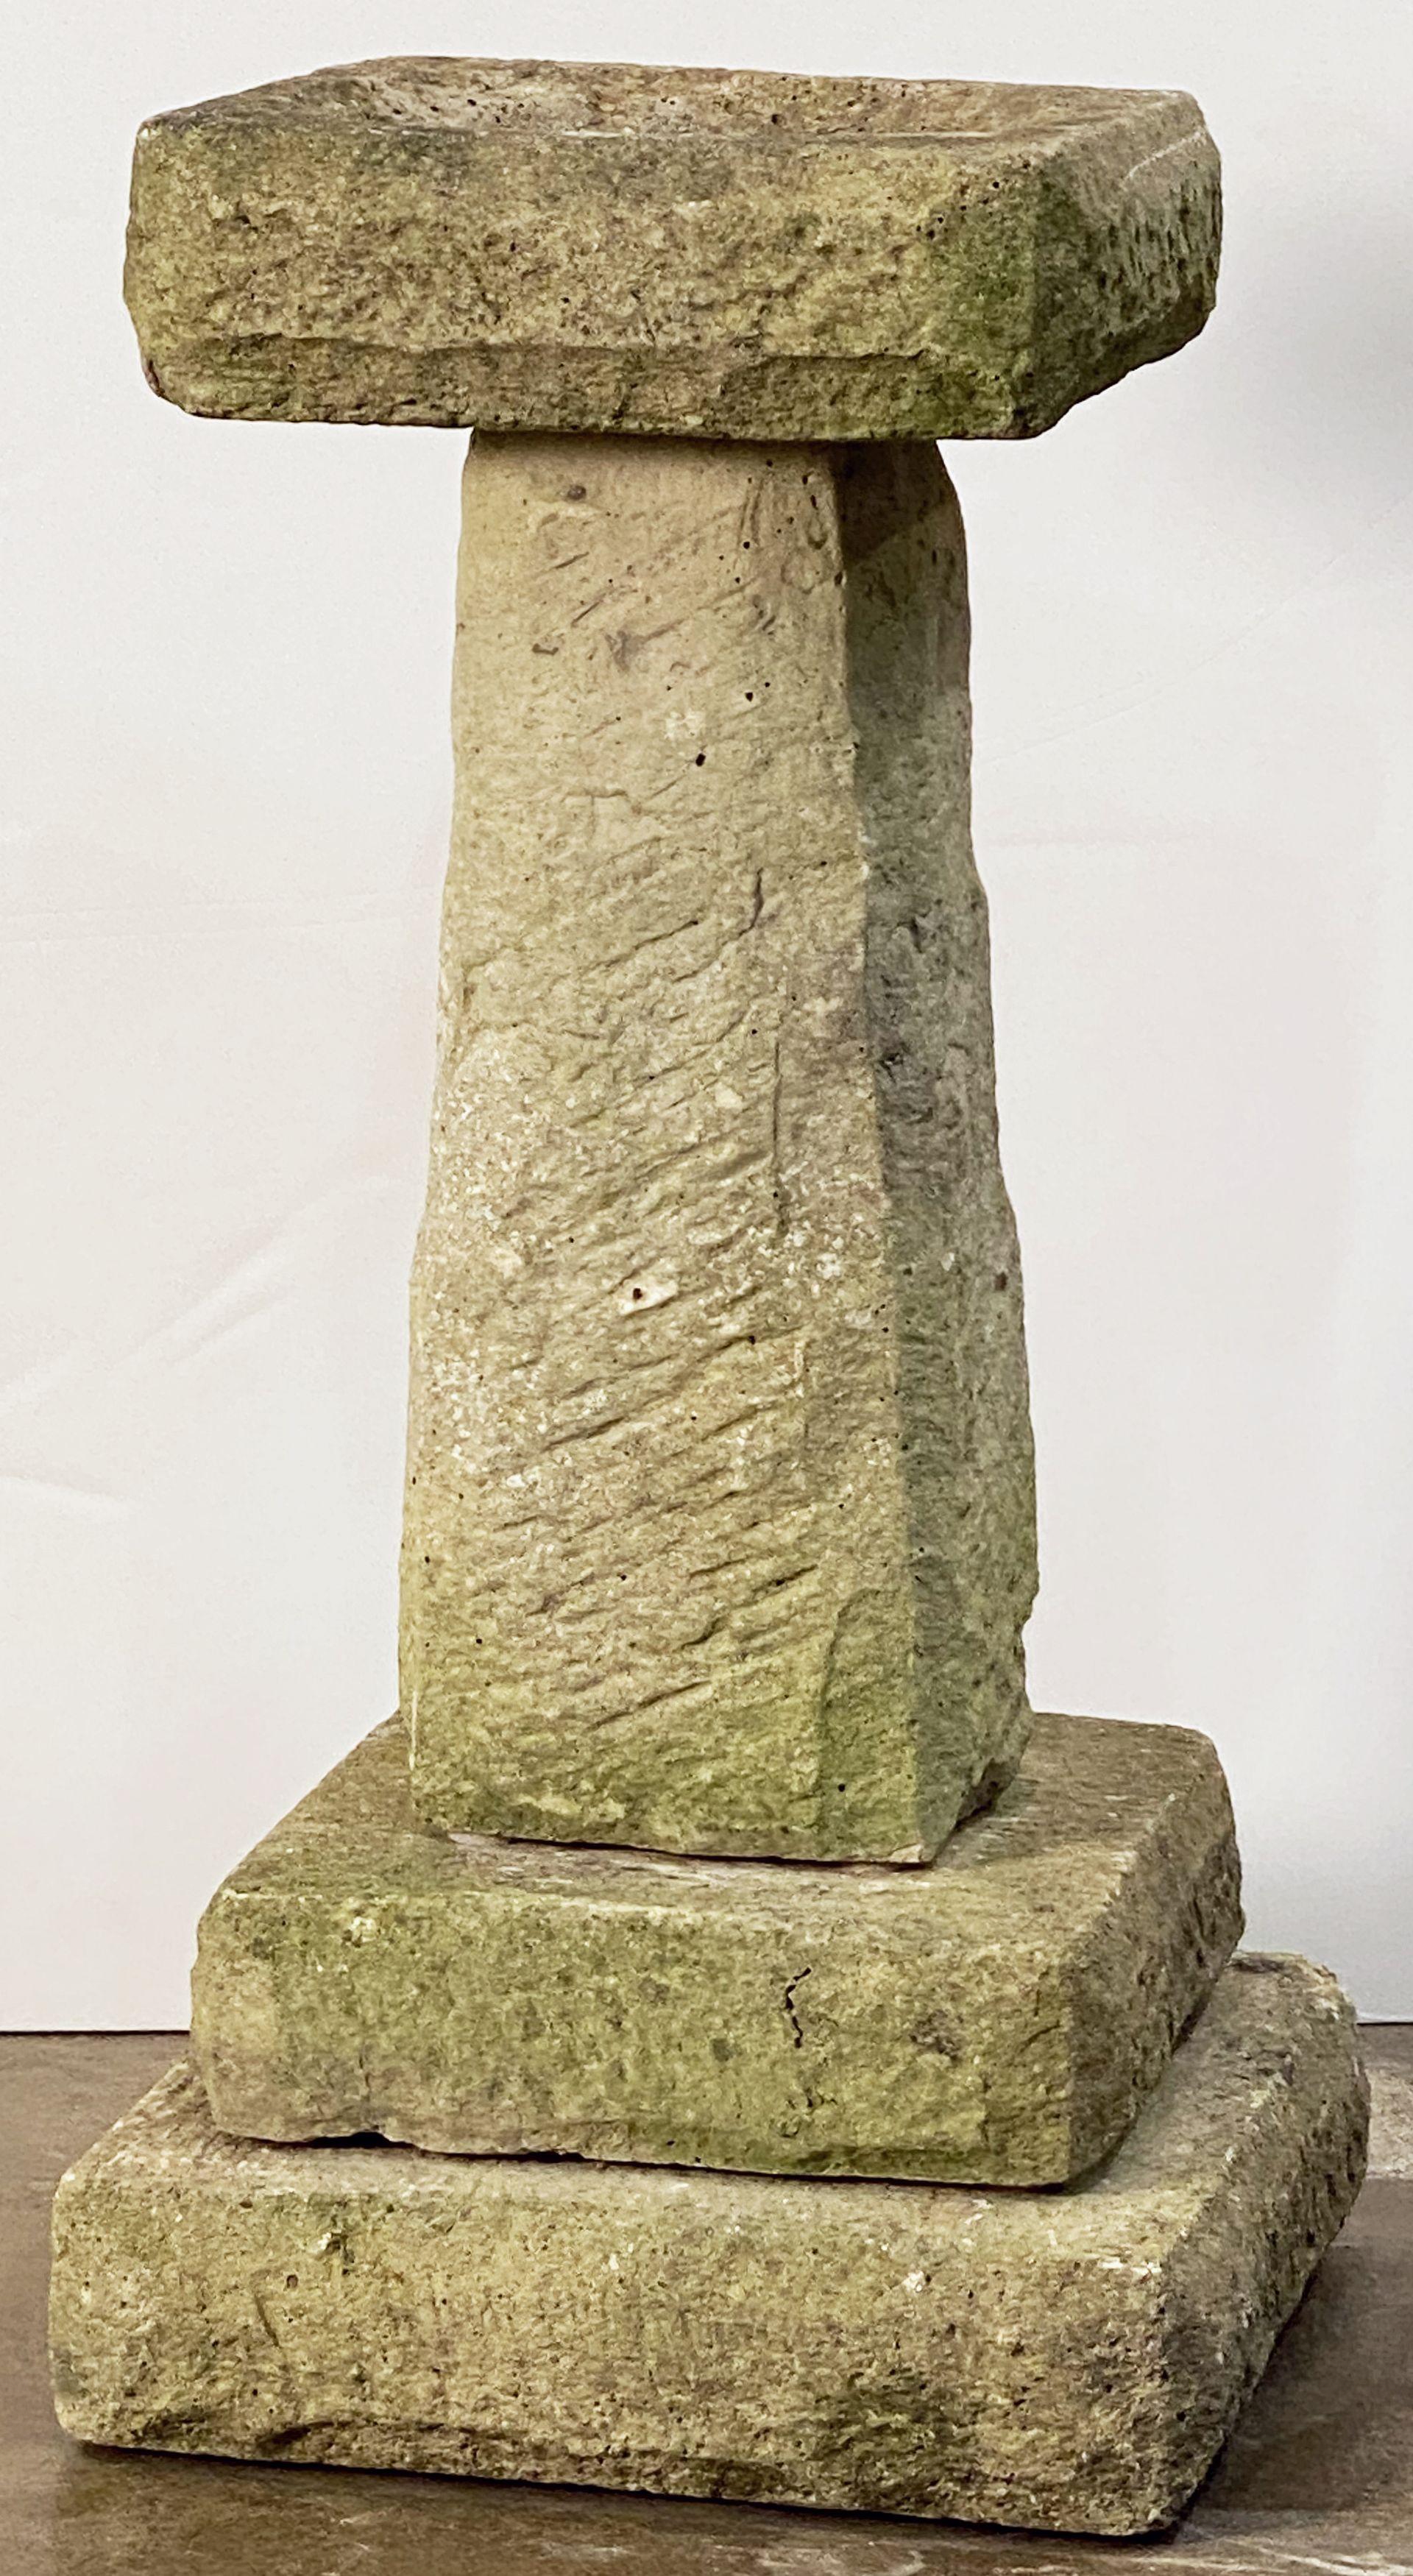 A fine English garden bird bath of cut stone, featuring a square top with round recessed bath area in the center, set upon a four-sided pedestal with graduated square plinth base.

Dimensions: H 28 1/2 inches x Base W 14 1/2 inches x Base D 14 1/2